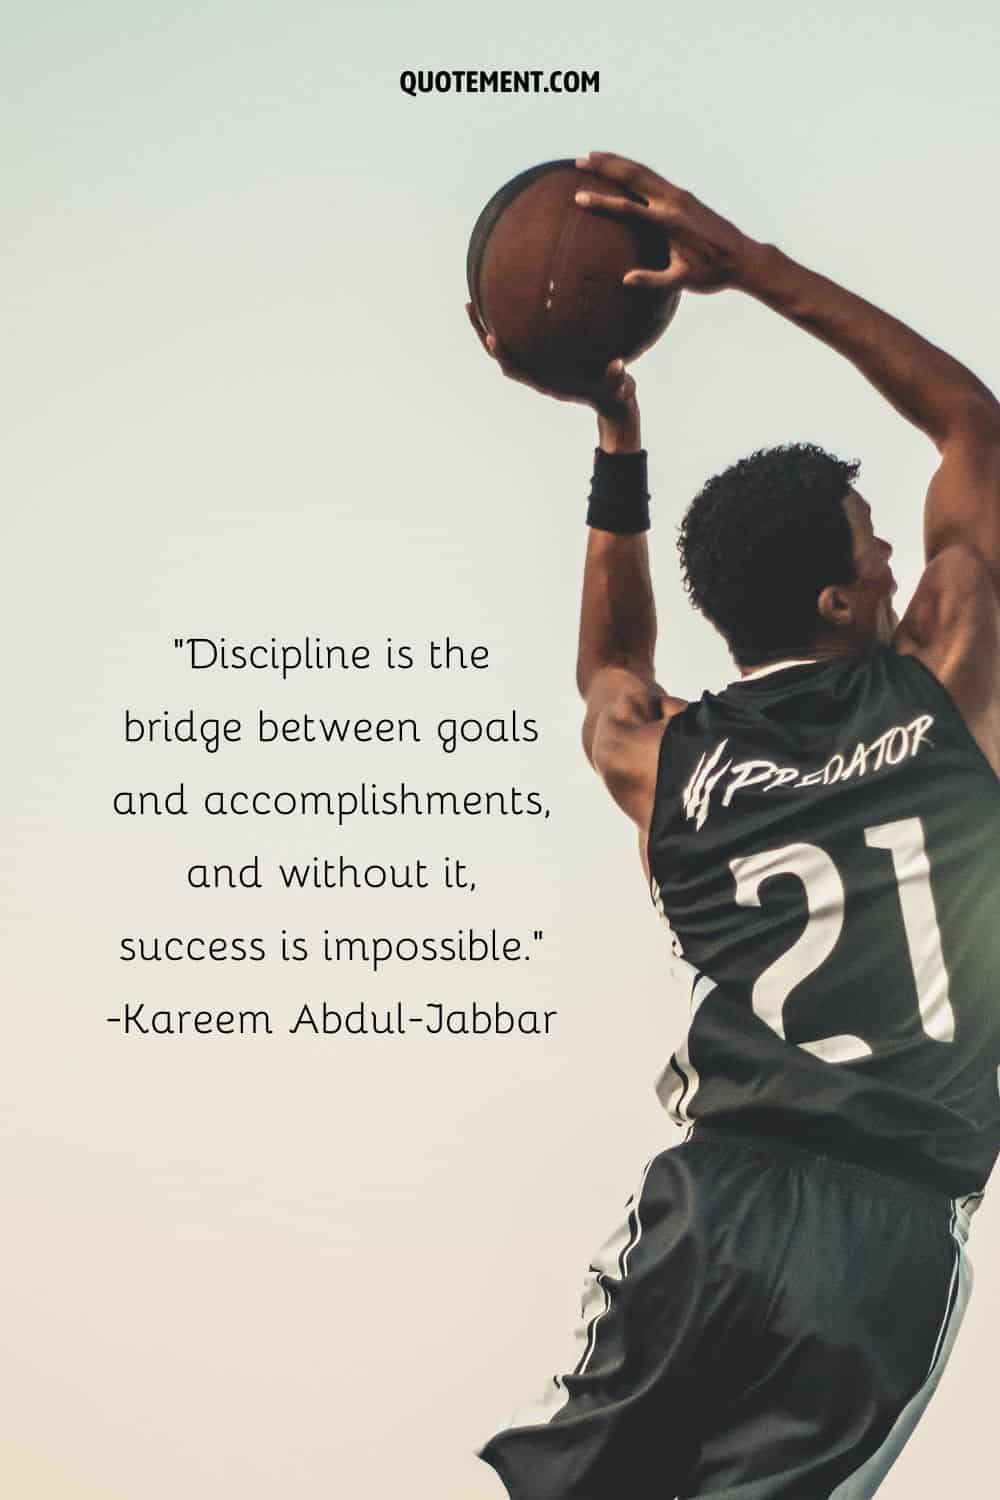 Discipline is the bridge between goals and accomplishments, and without it, success is impossible